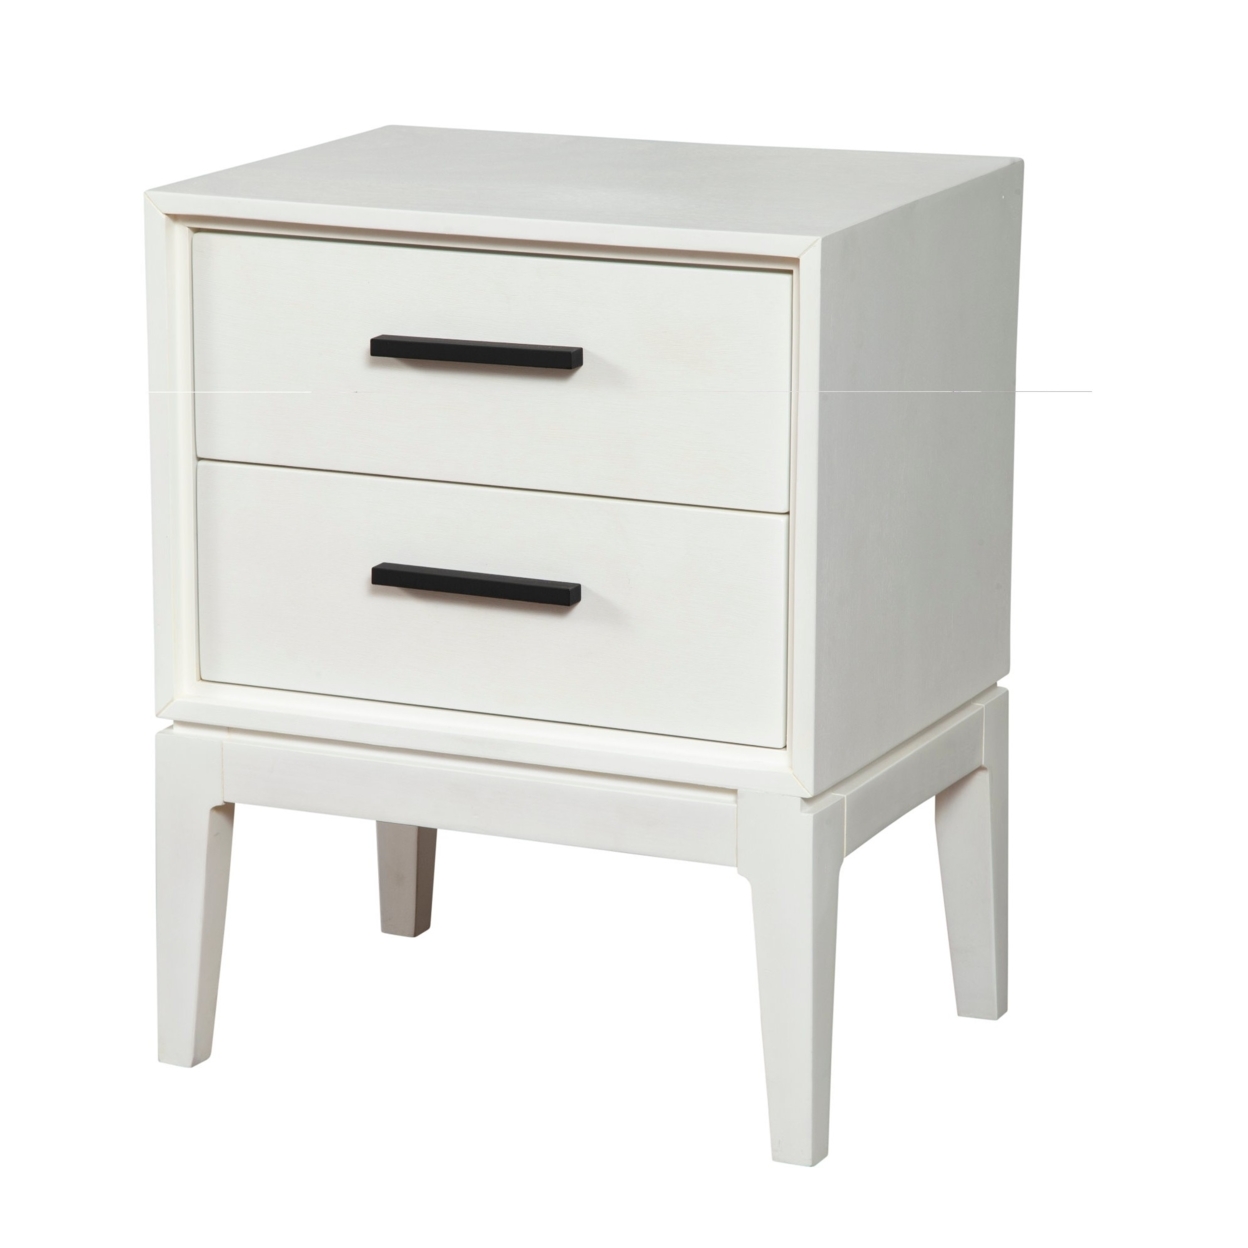 Nightstand With 2 Drawers And Wooden Frame, Off White- Saltoro Sherpi